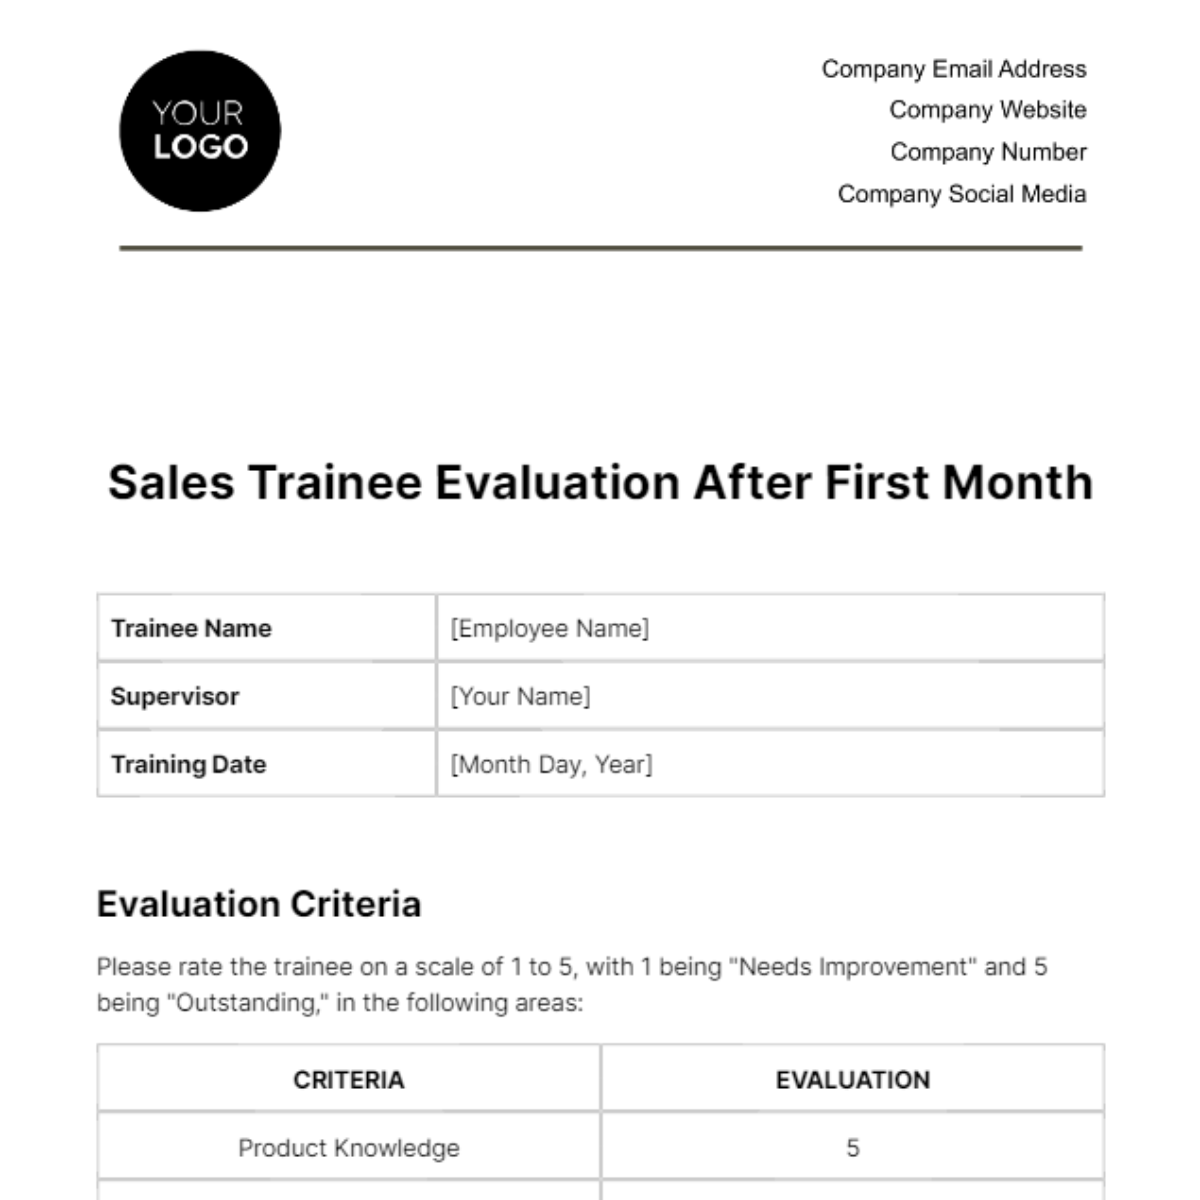 Sales Trainee Evaluation After First Month Template